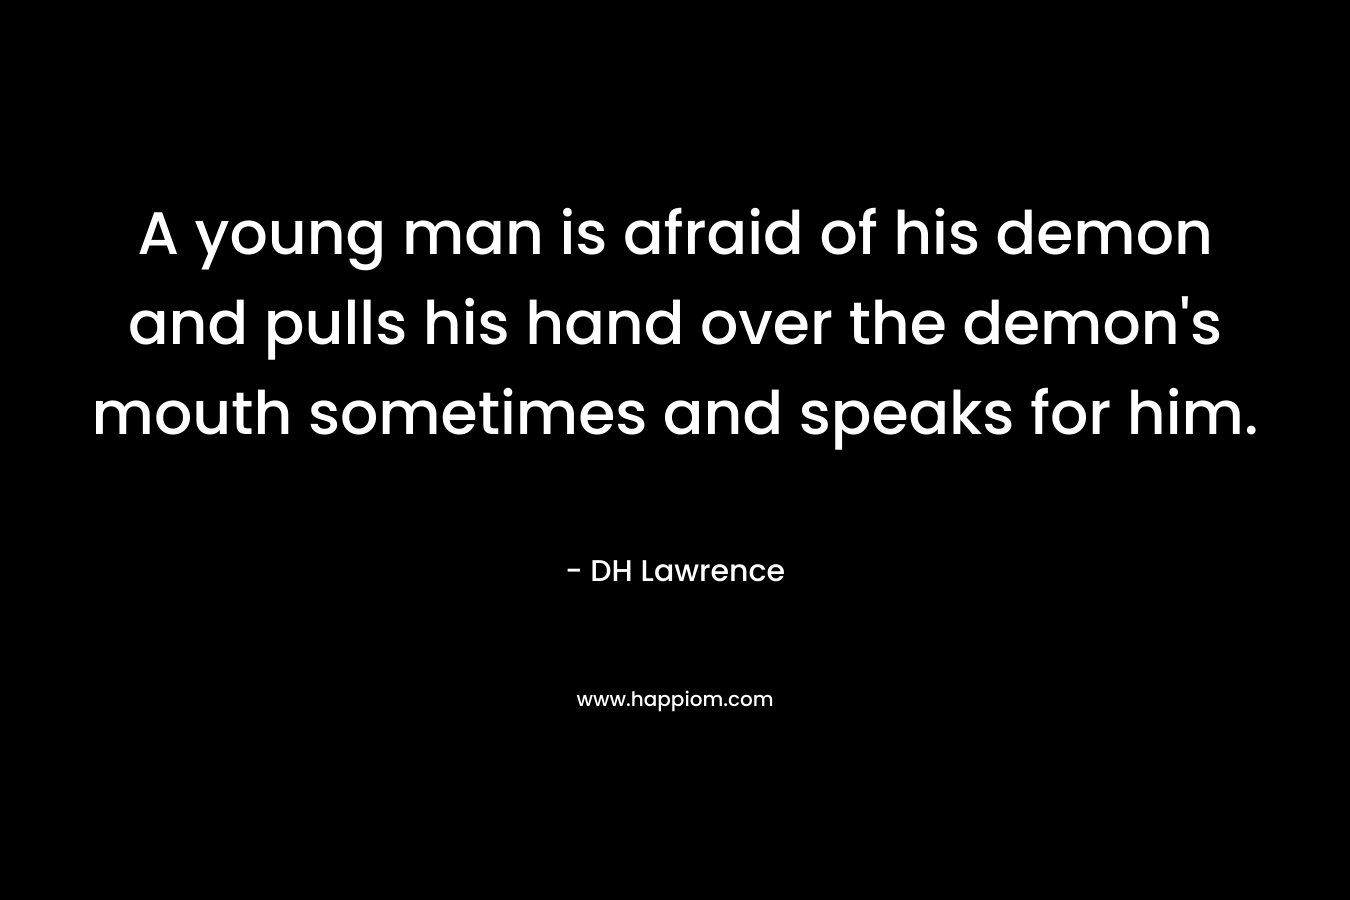 A young man is afraid of his demon and pulls his hand over the demon’s mouth sometimes and speaks for him. – DH Lawrence